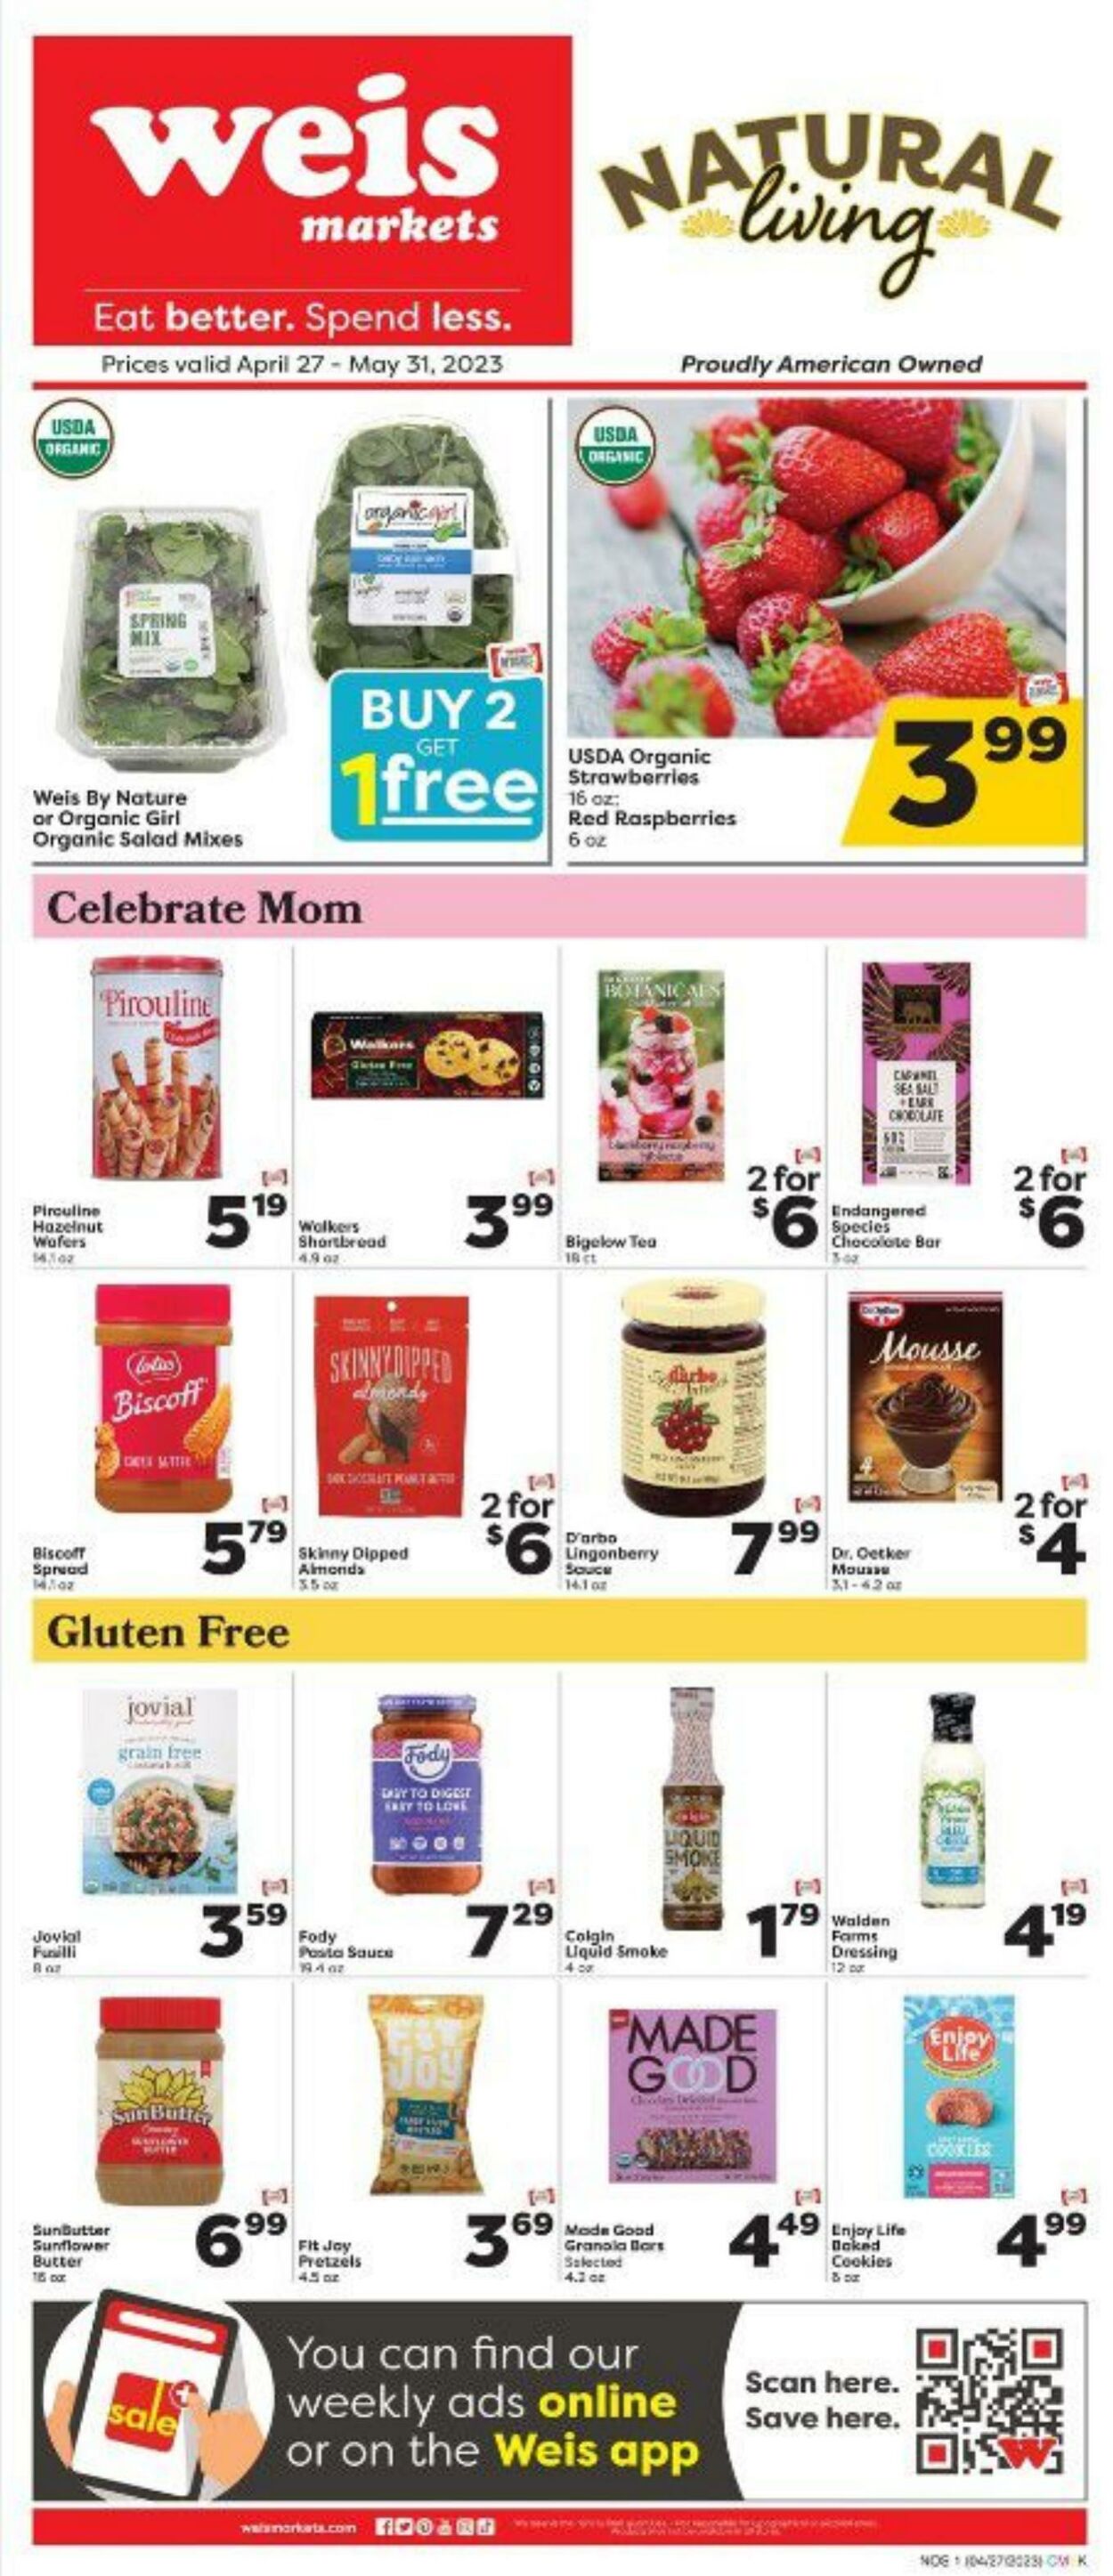 Weis Promotional weekly ads